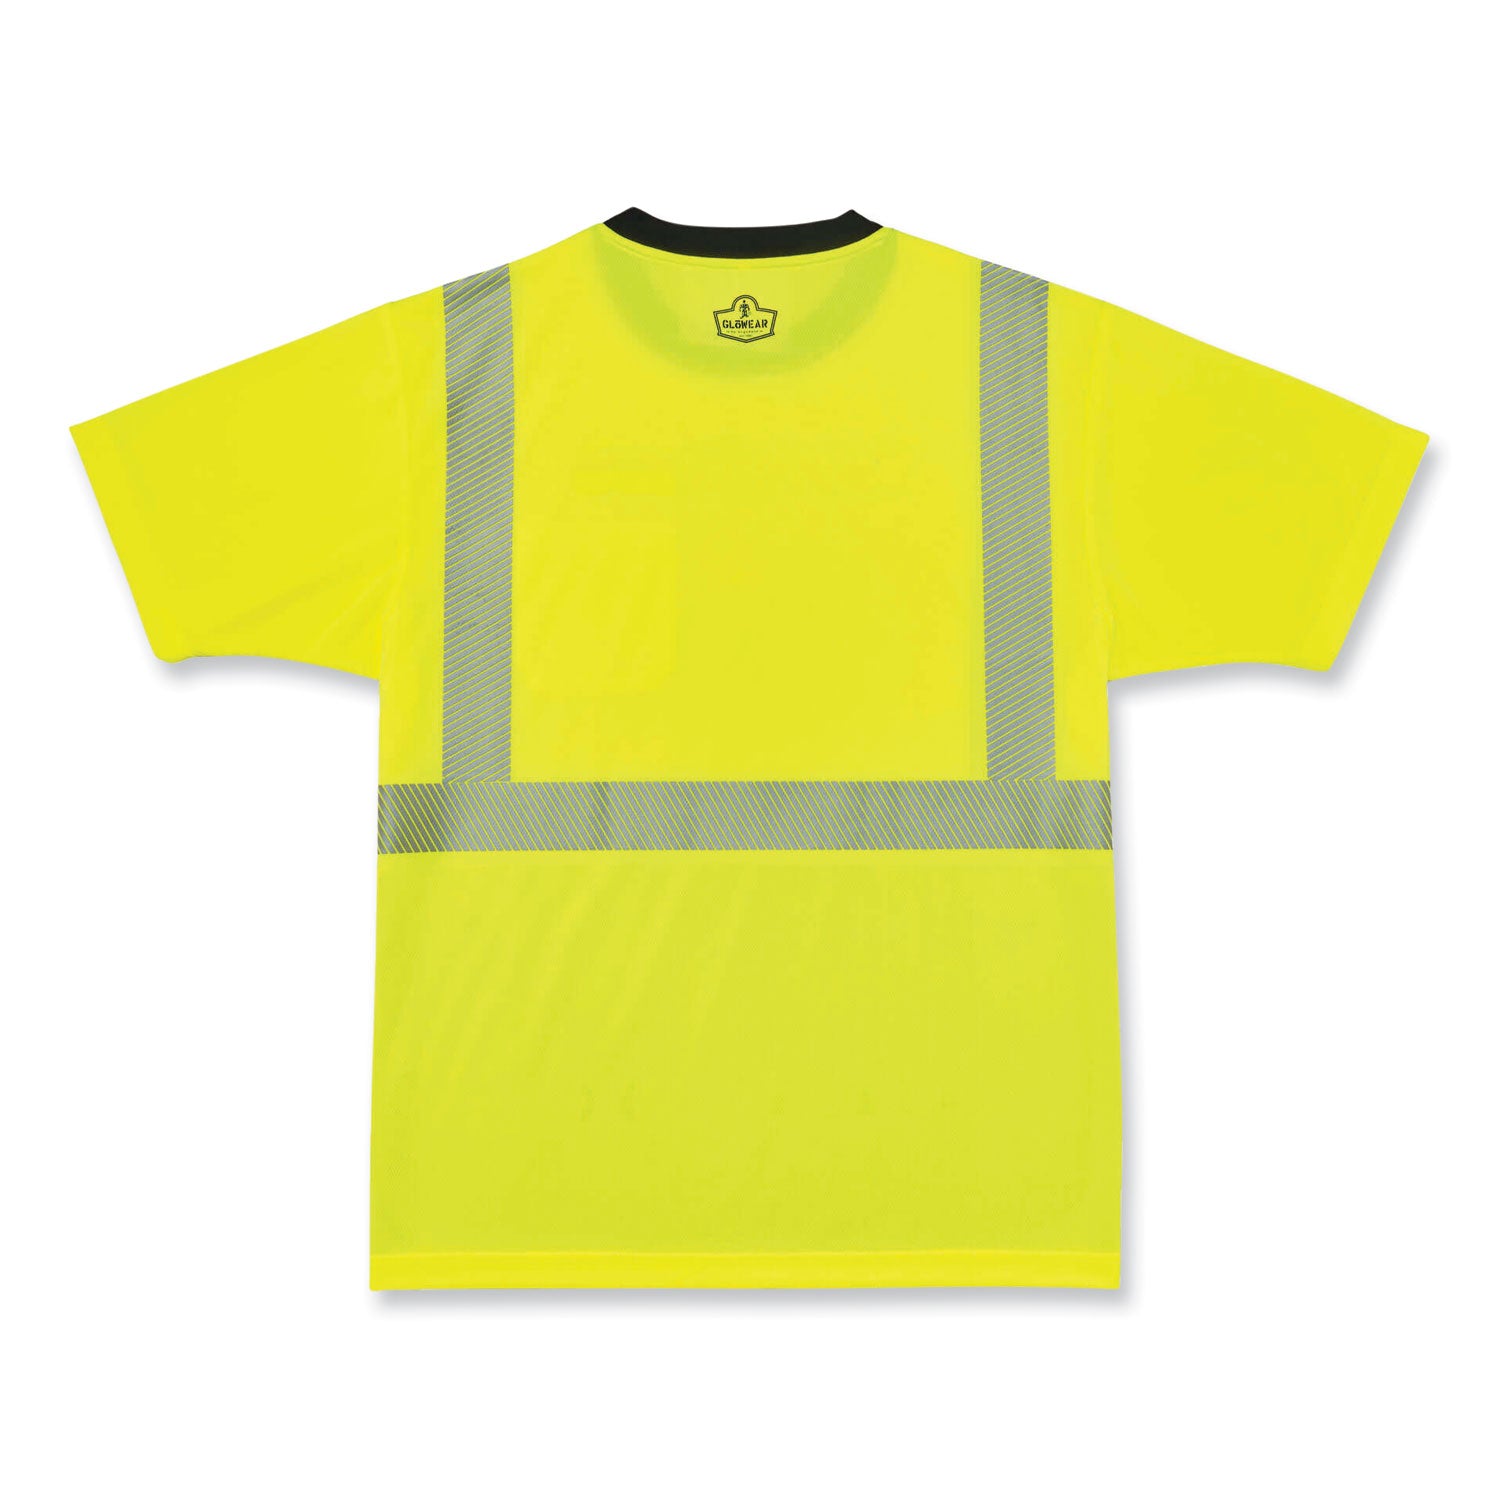 glowear-8280bk-class-2-performance-t-shirt-with-black-bottom-polyester-medium-lime-ships-in-1-3-business-days_ego22533 - 3